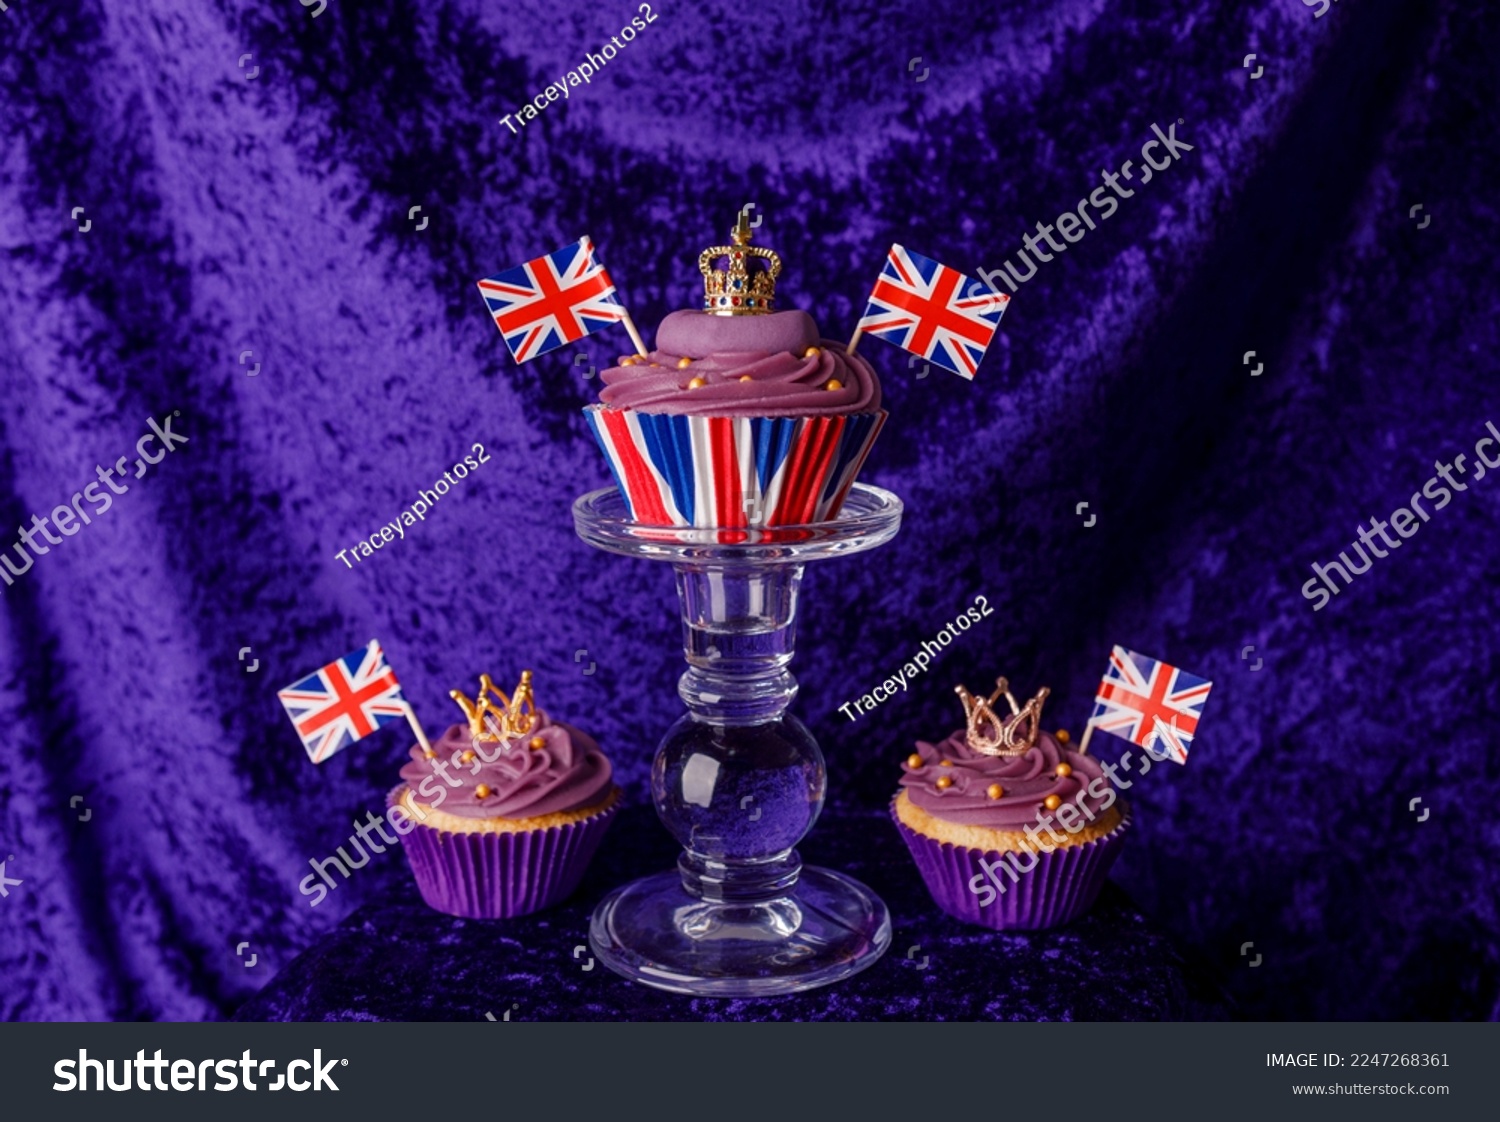 Royal Coronation Cupcakes to celebrate the coronation of King Charles III. Cupcakes decorated with the crown, purple velvet backdrop, union jacks flags, luxury cupcakes on a pedestal.  #2247268361